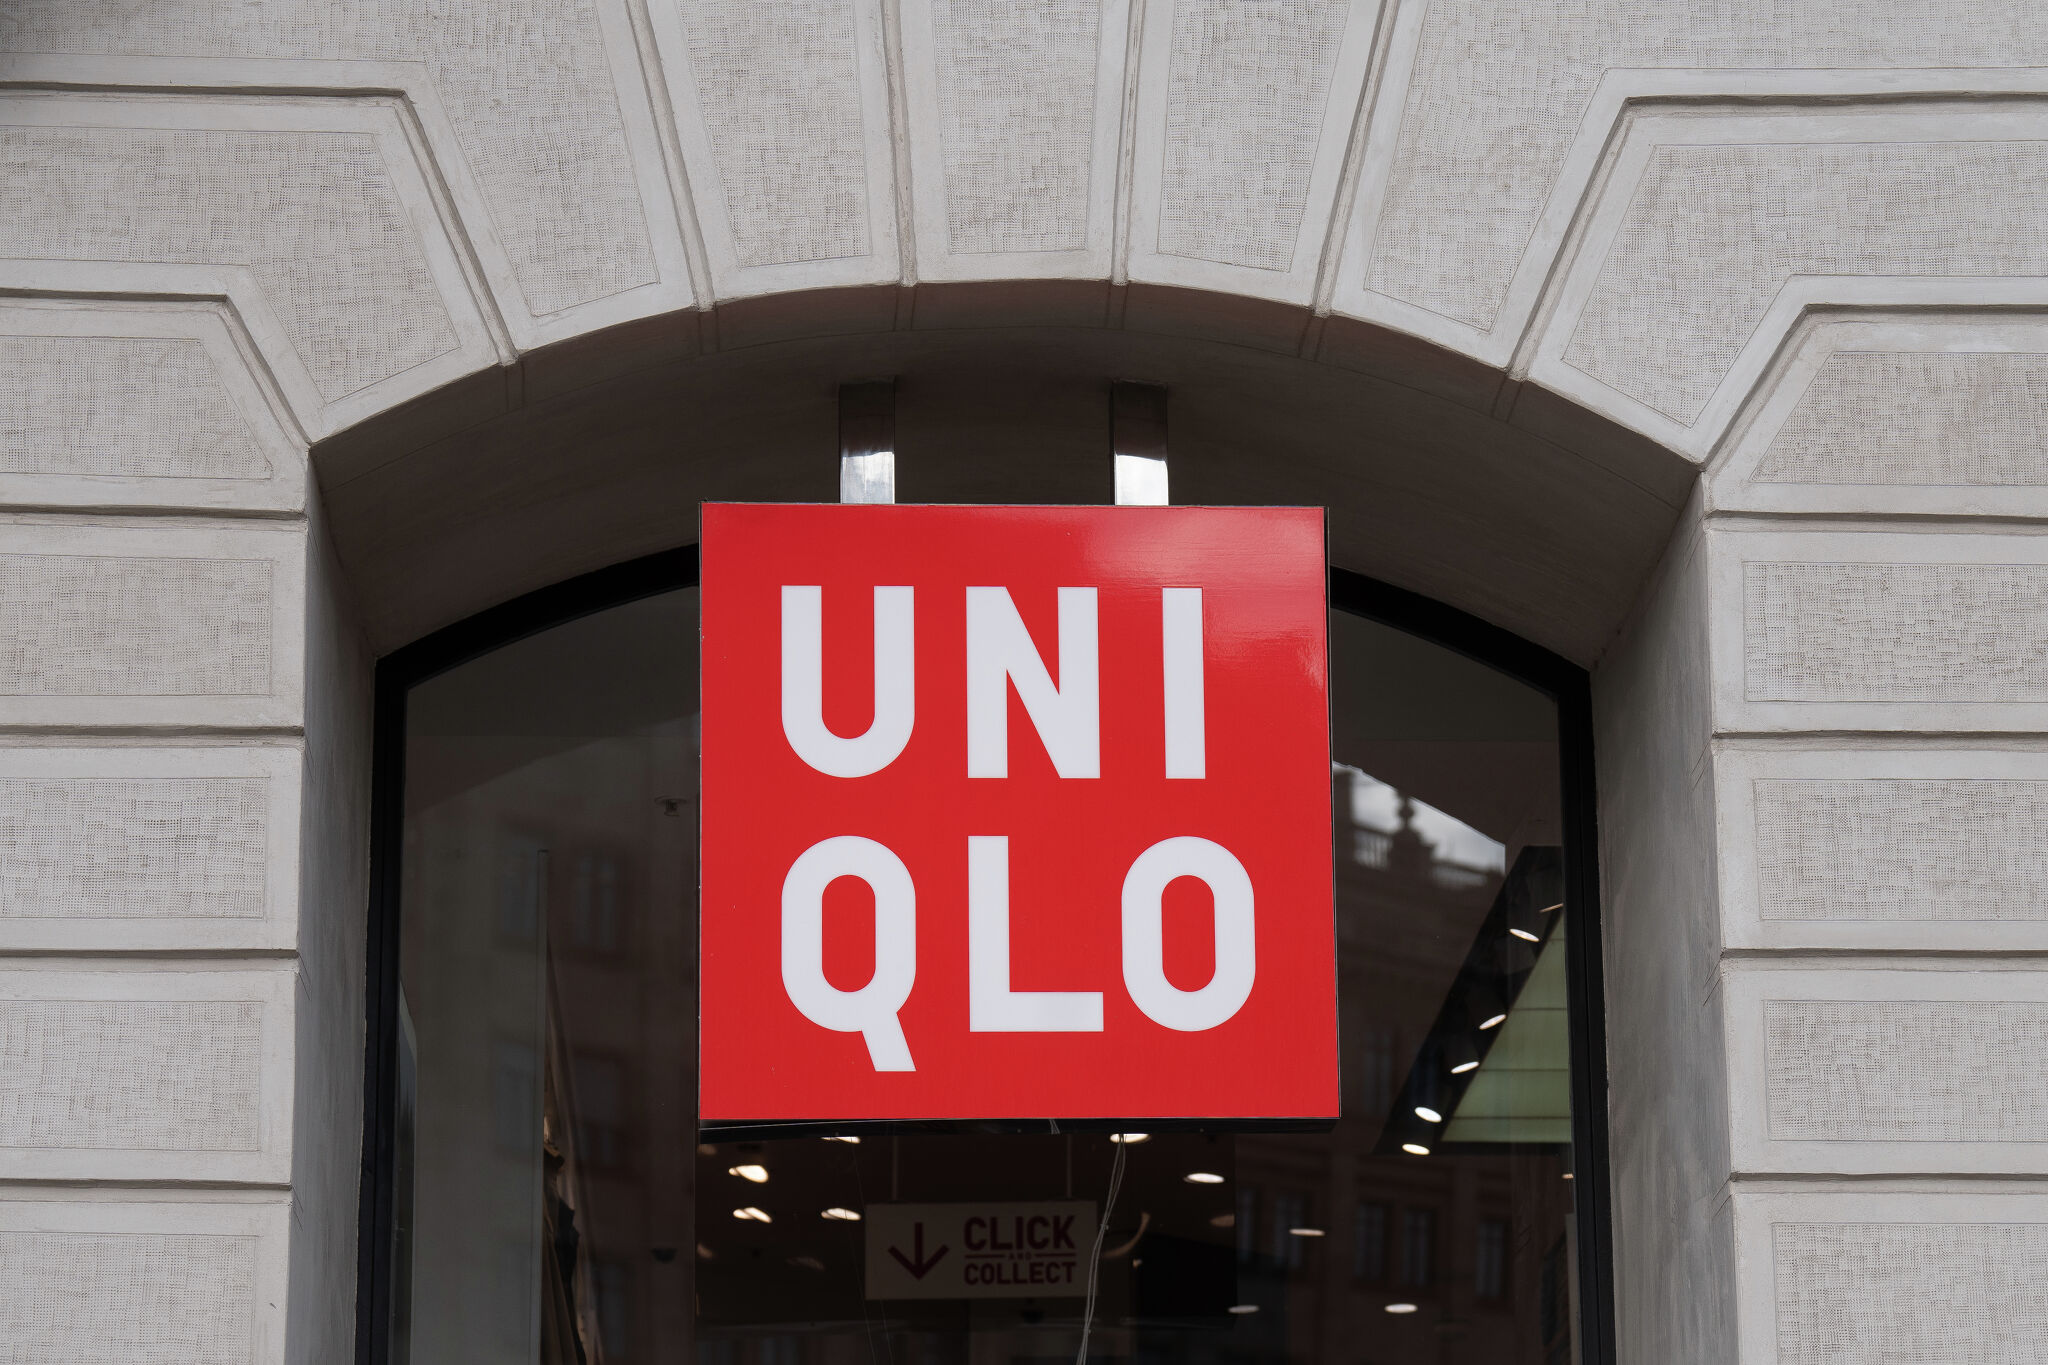 Popular Japanese retailer Uniqlo is coming to Texas